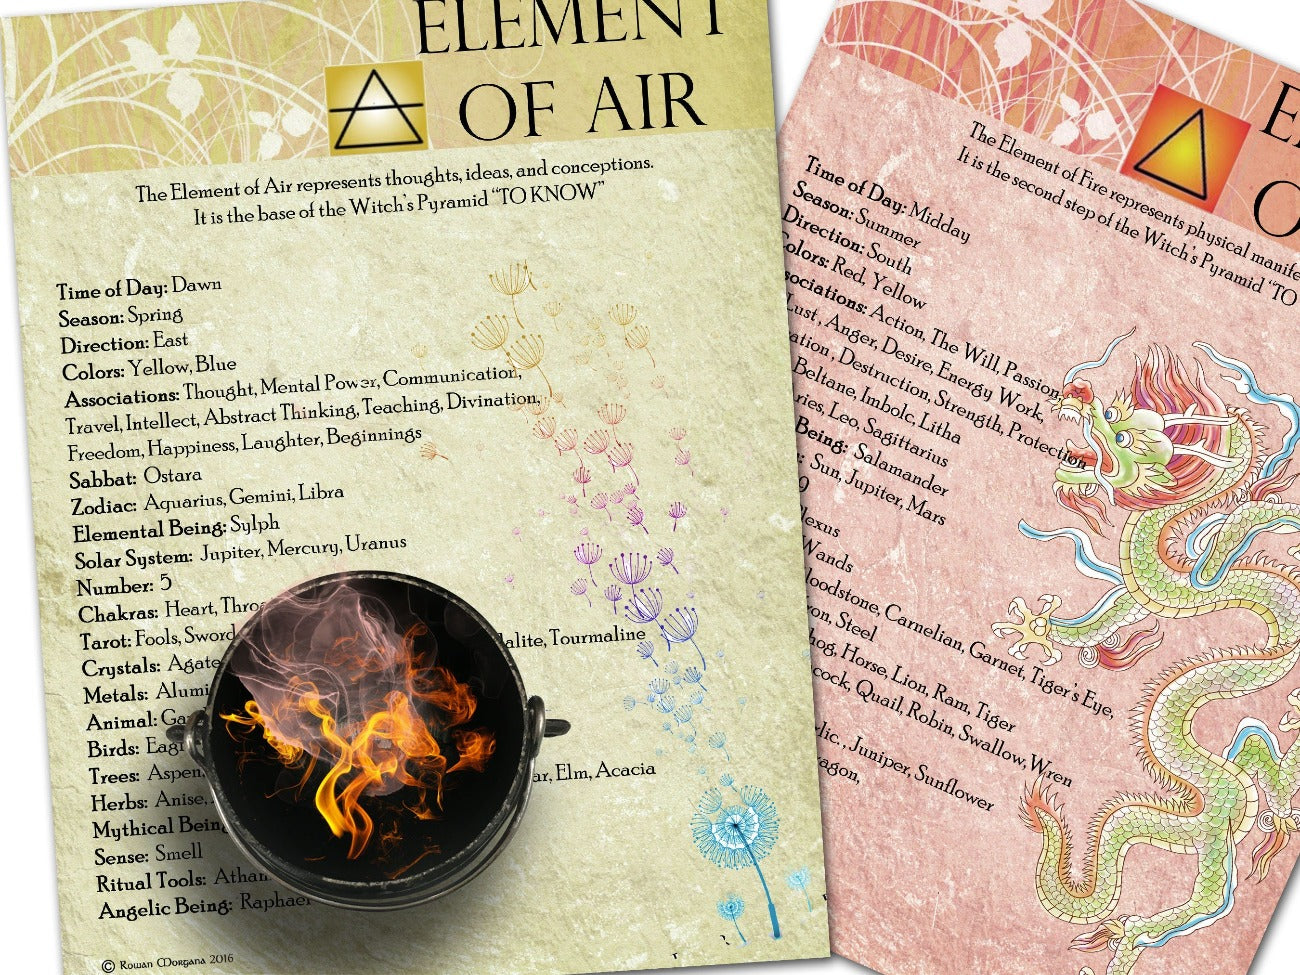 WICCAN ELEMENTS 4 Pages, Wicca Earth Air Fire Water, Witchcraft Cast Magic Circle, Elements Correspondences, Call the Quarters BOS Printable - Morgana Magick Spell